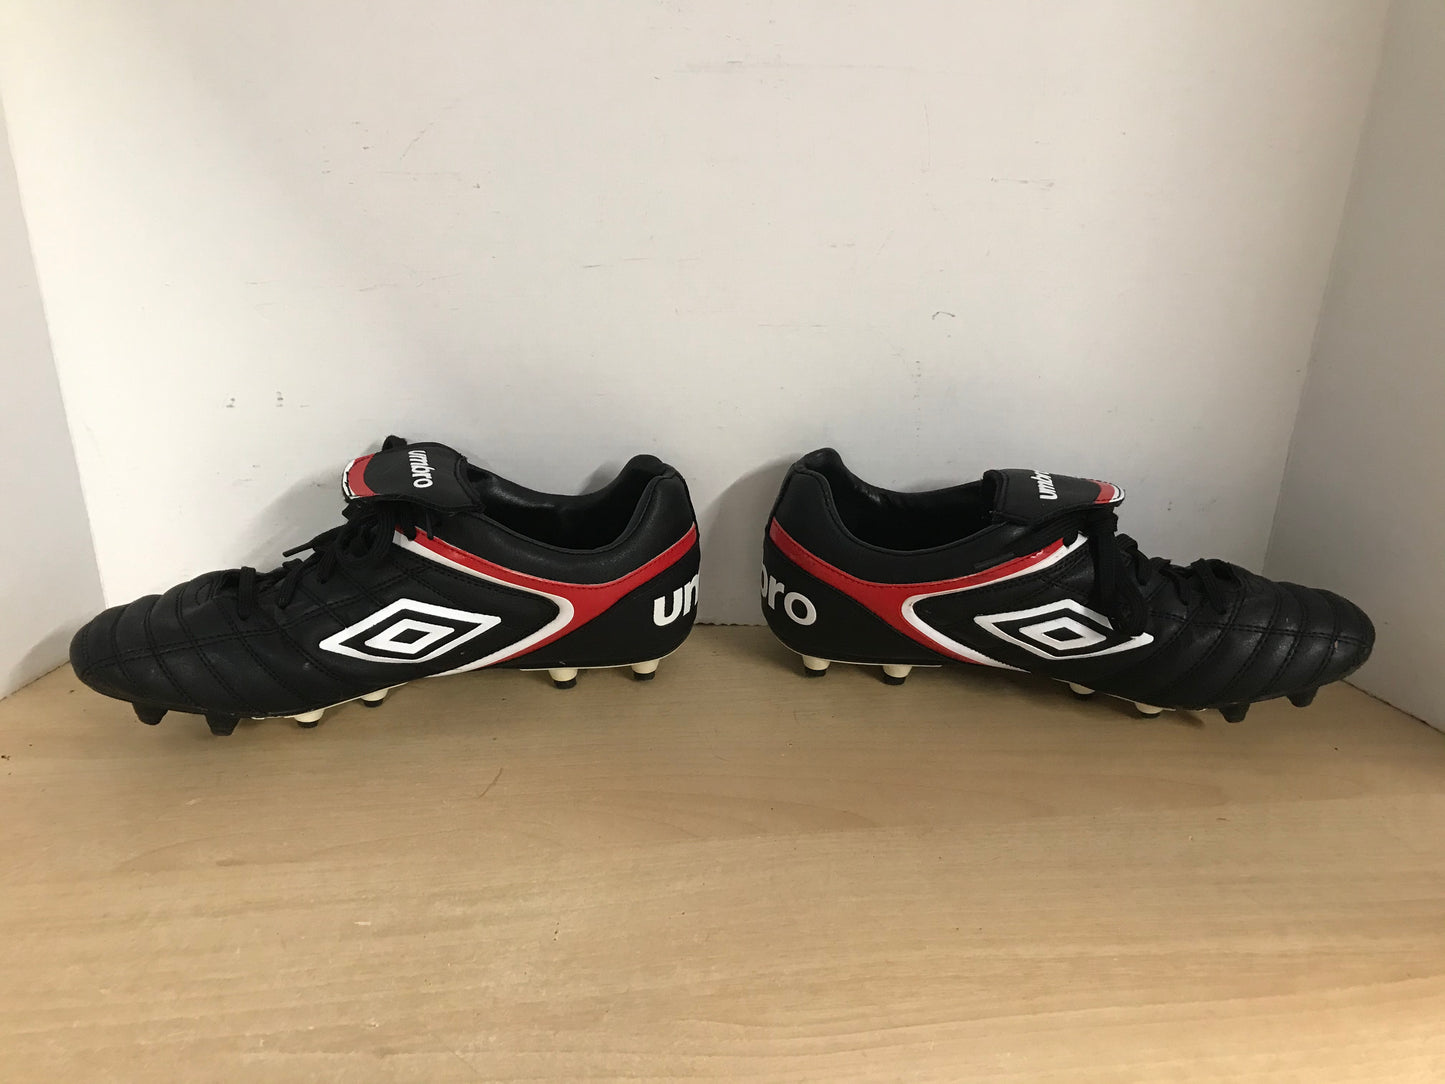 Soccer Shoes Cleats Men's Size 10 Umbro Red White Black Excellent As New